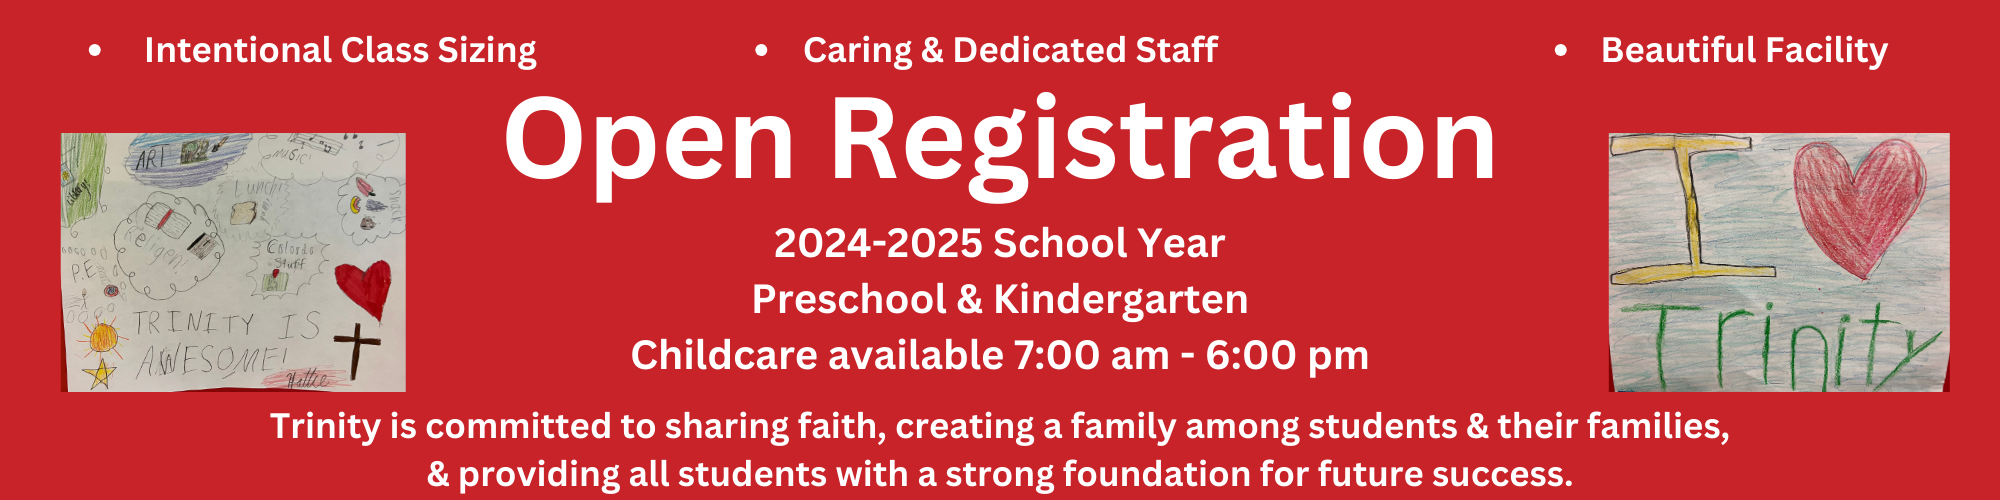 Open Registration - 2024-2025 School Year - Preschool & Kindergarten - Childcare available 7:00 a.m.-6:00 p.m. Trinity is committed to sharing faith, creating a family among students & their families & providing all students with a strong foundation